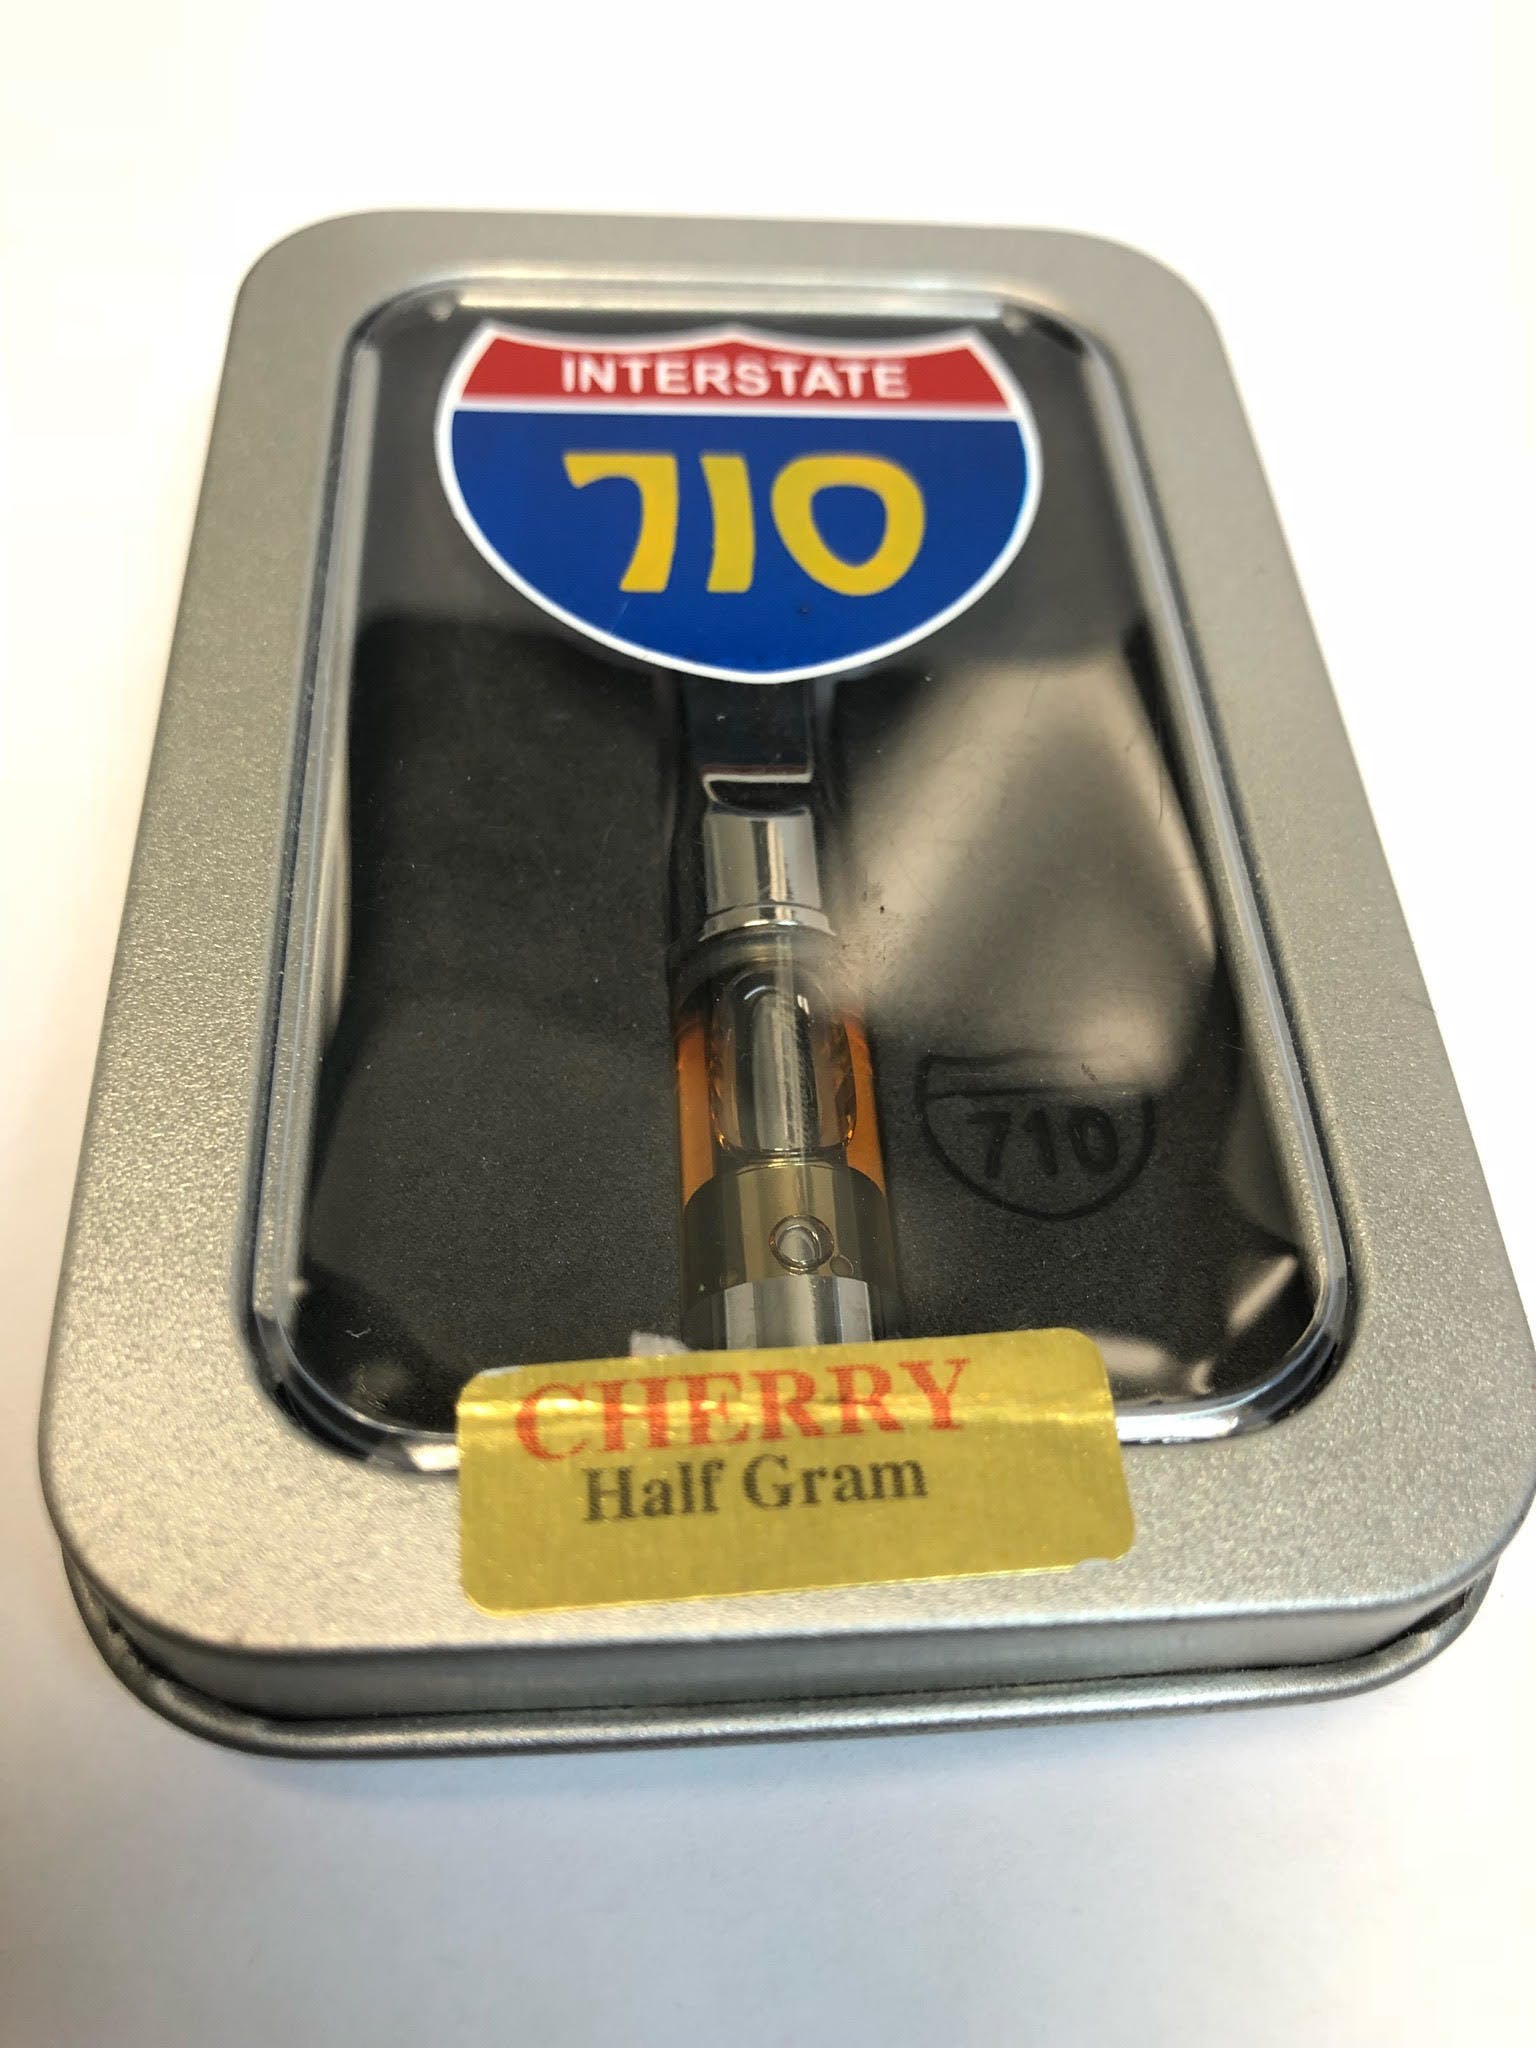 concentrate-710-interstate-cannabinoids-cherry